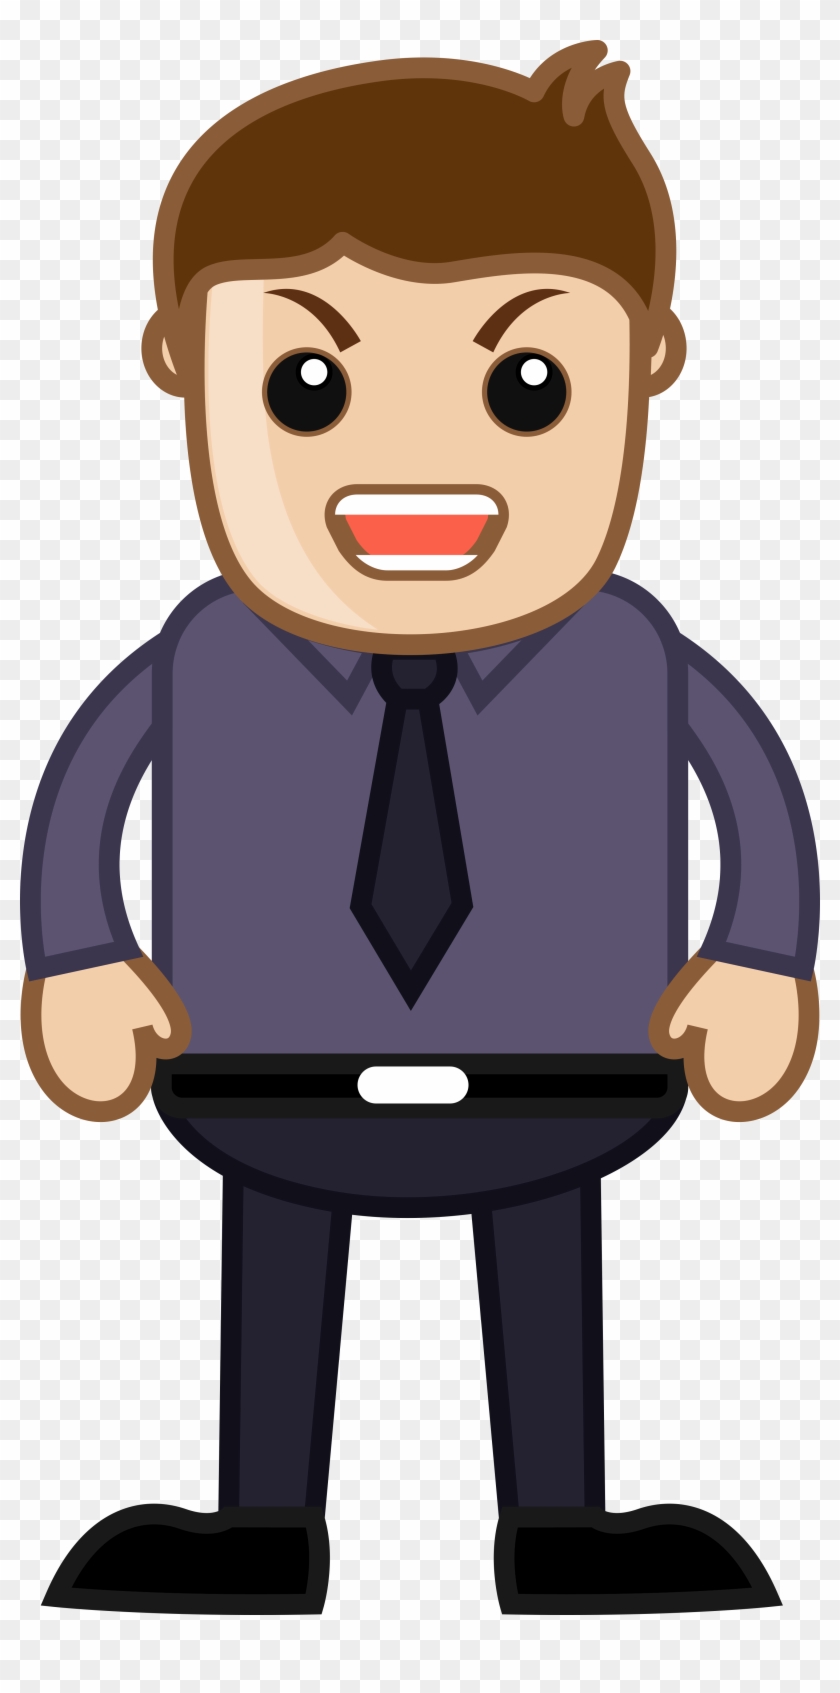 Angry Man Cartoon Png - Free Transparent PNG Clipart Images Download